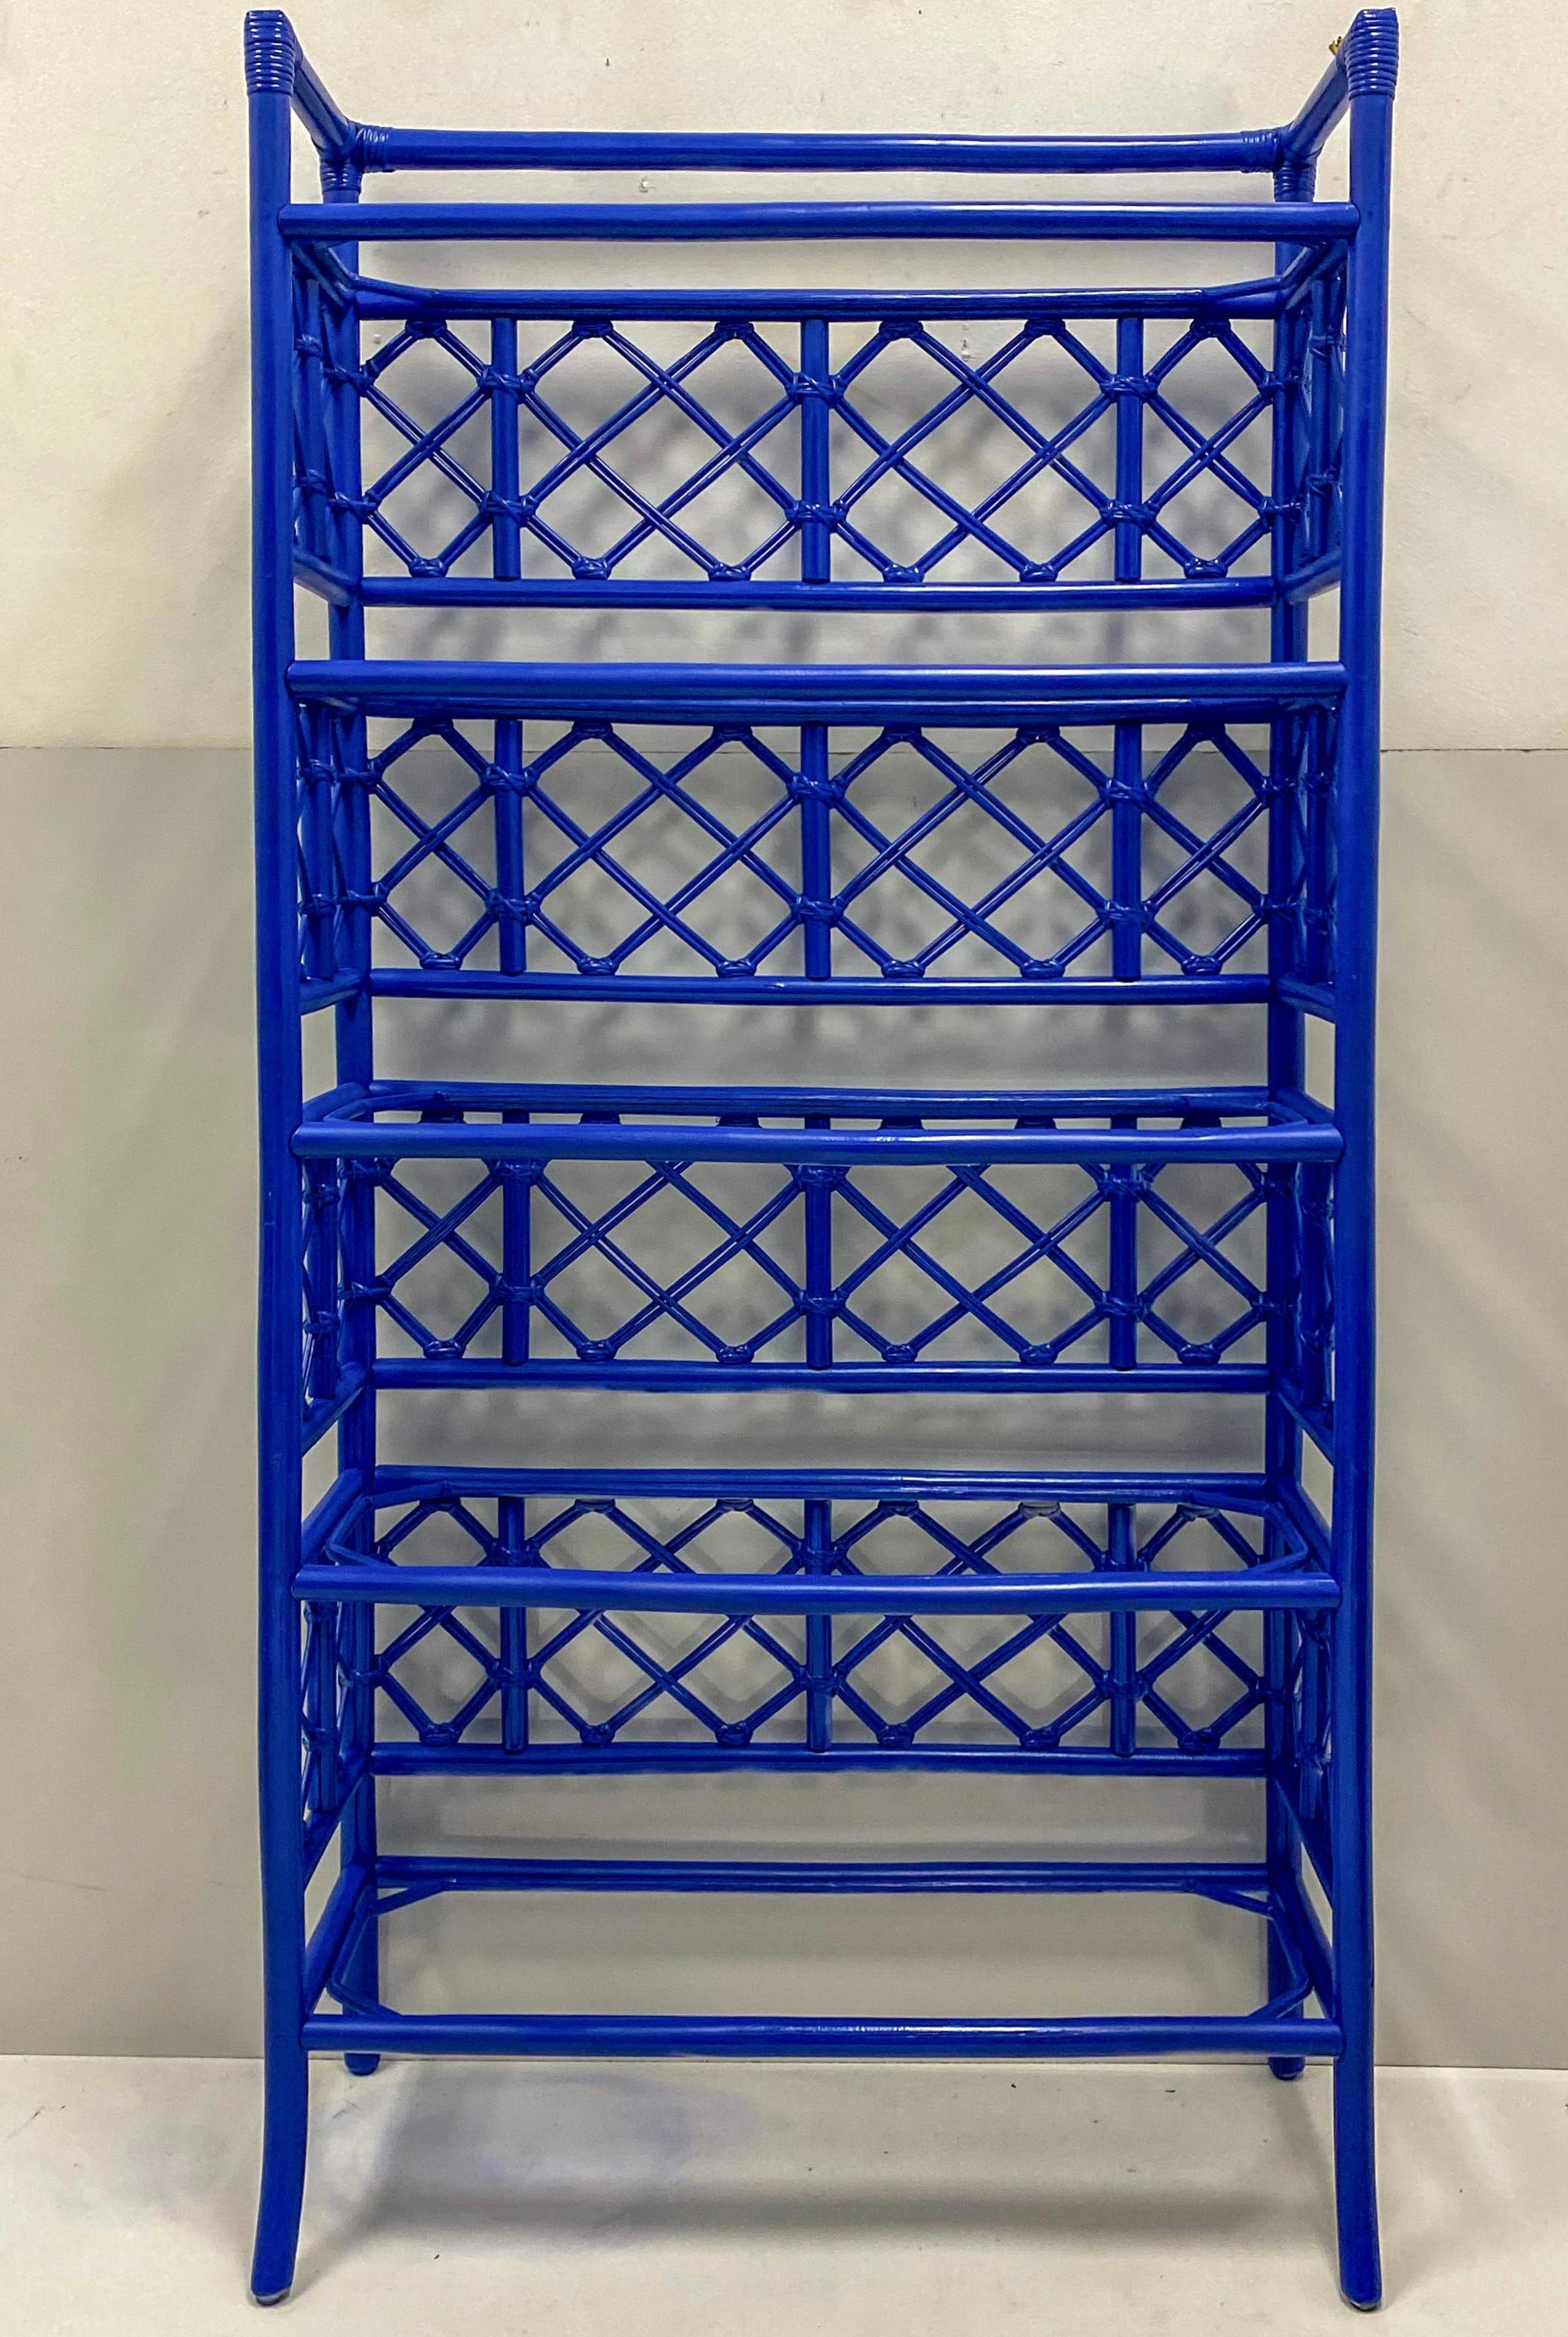 1960s Chippendale Style Blue Painted Rattan Shelf / Etagere by McGuire In Good Condition For Sale In Kennesaw, GA